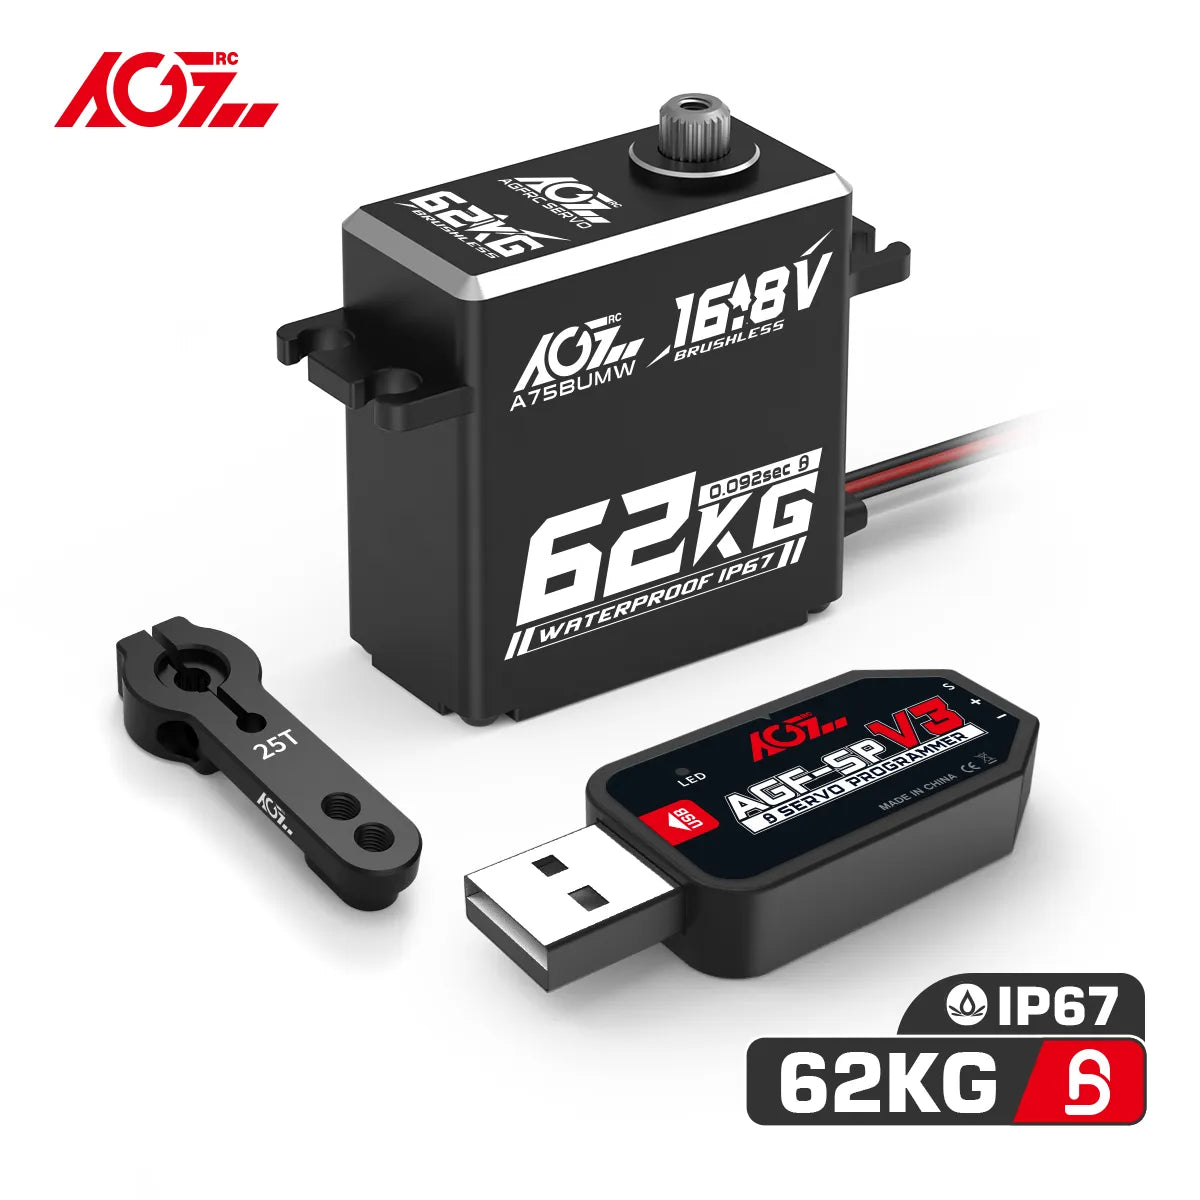 AGFRC A75BUMW -  4S 16.8V 62KG Super Torque HV Programmable Waterproof Brushless RC Servo For 1/8 1/10 RC Car Crawler Buggy Truck